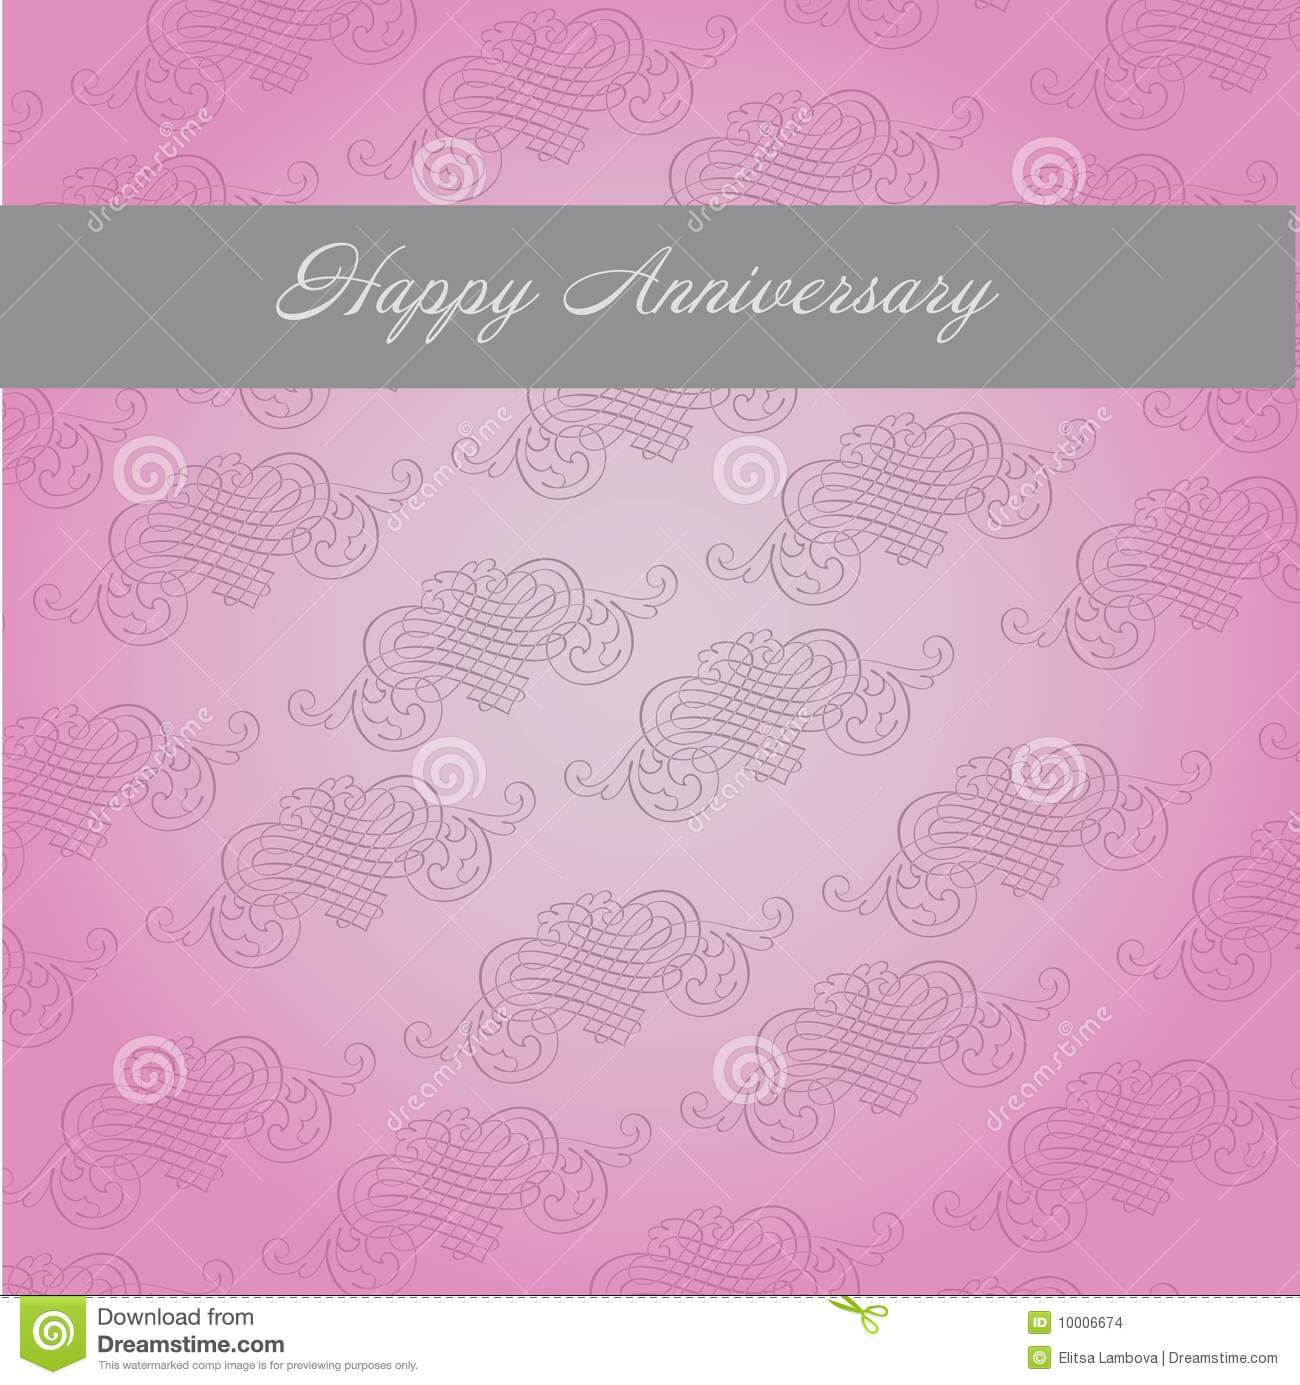 Anniversary Template Stock Vector. Illustration Of Greeting In Template For Anniversary Card